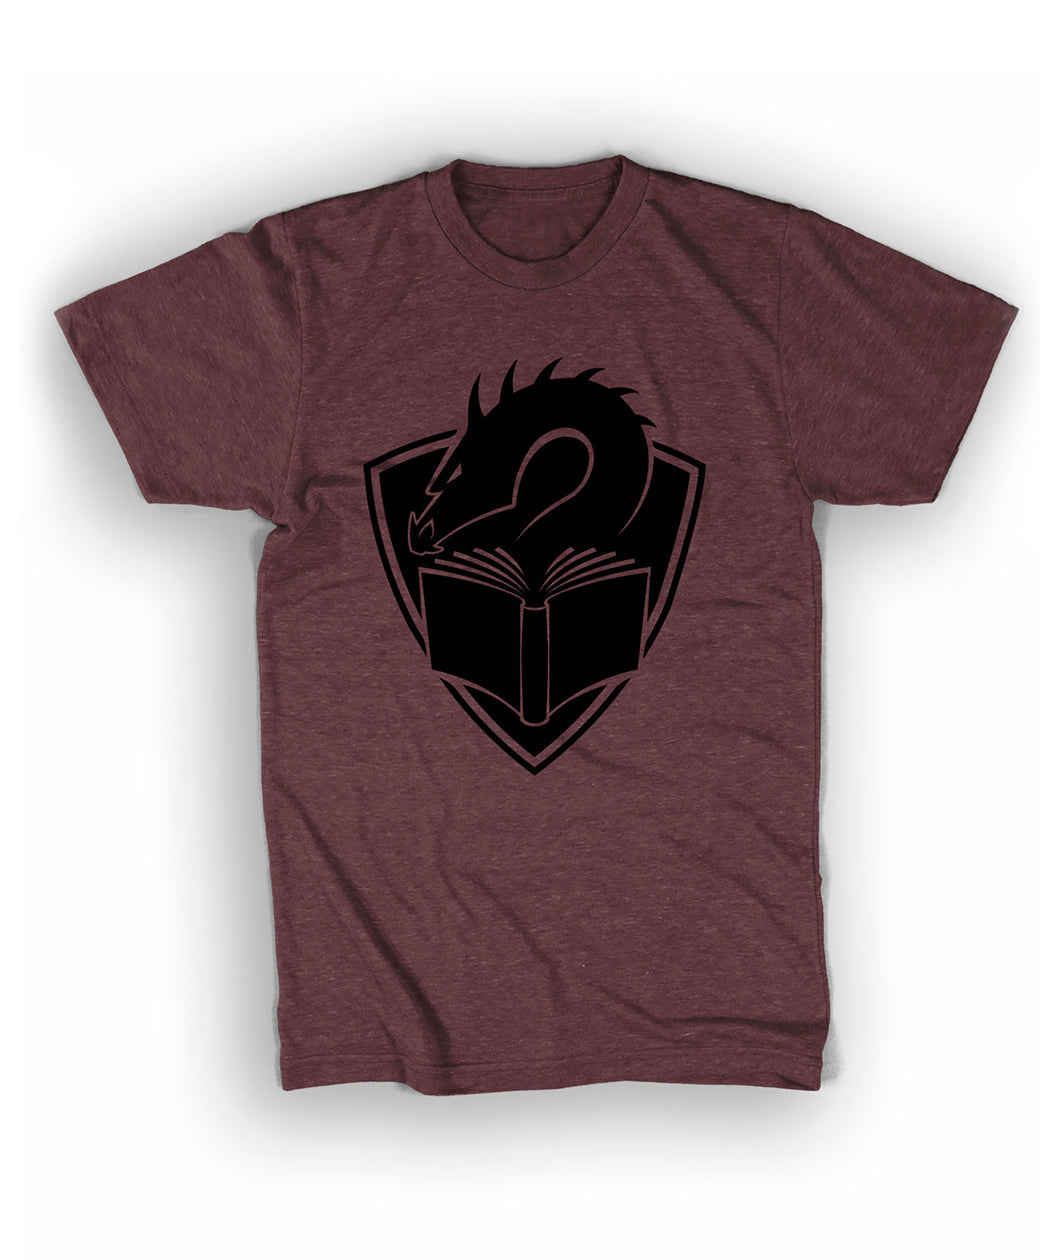 A heather maroon t-shirt with a centered large black illustration of a dragon's head peering at the pages of an open book, with a crest shape in the background. 